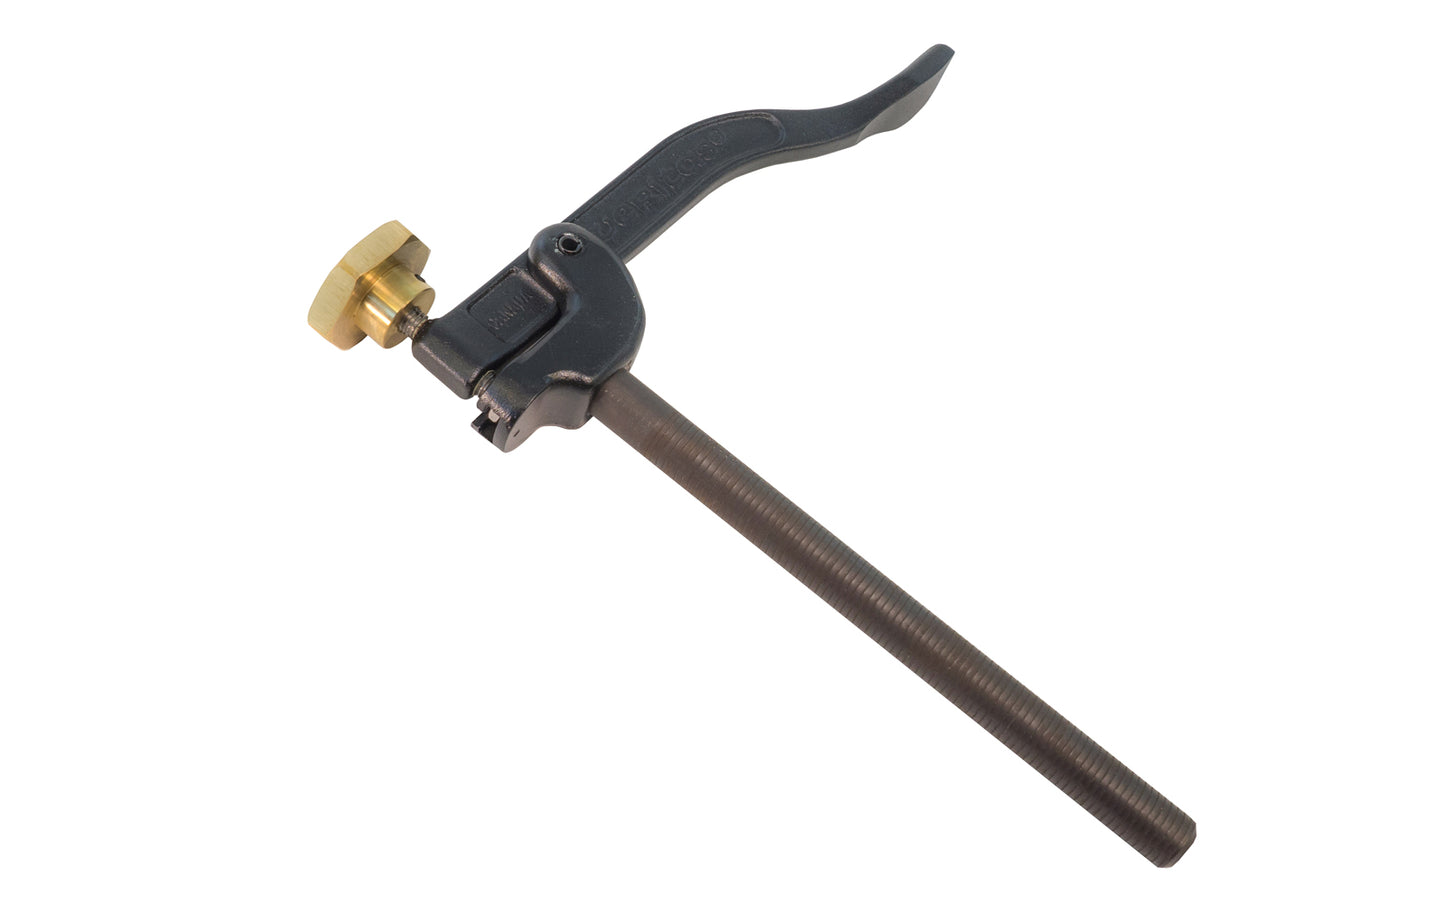 This Veritas hold down fits in a 3/4" diameter hole on a work bench, and clamps in any direction where clamping is required. 10" forged steel arm. Clamping capacity is 8" & throat capacity is 8". Veritas Model 05G14.01 Made in Canada.